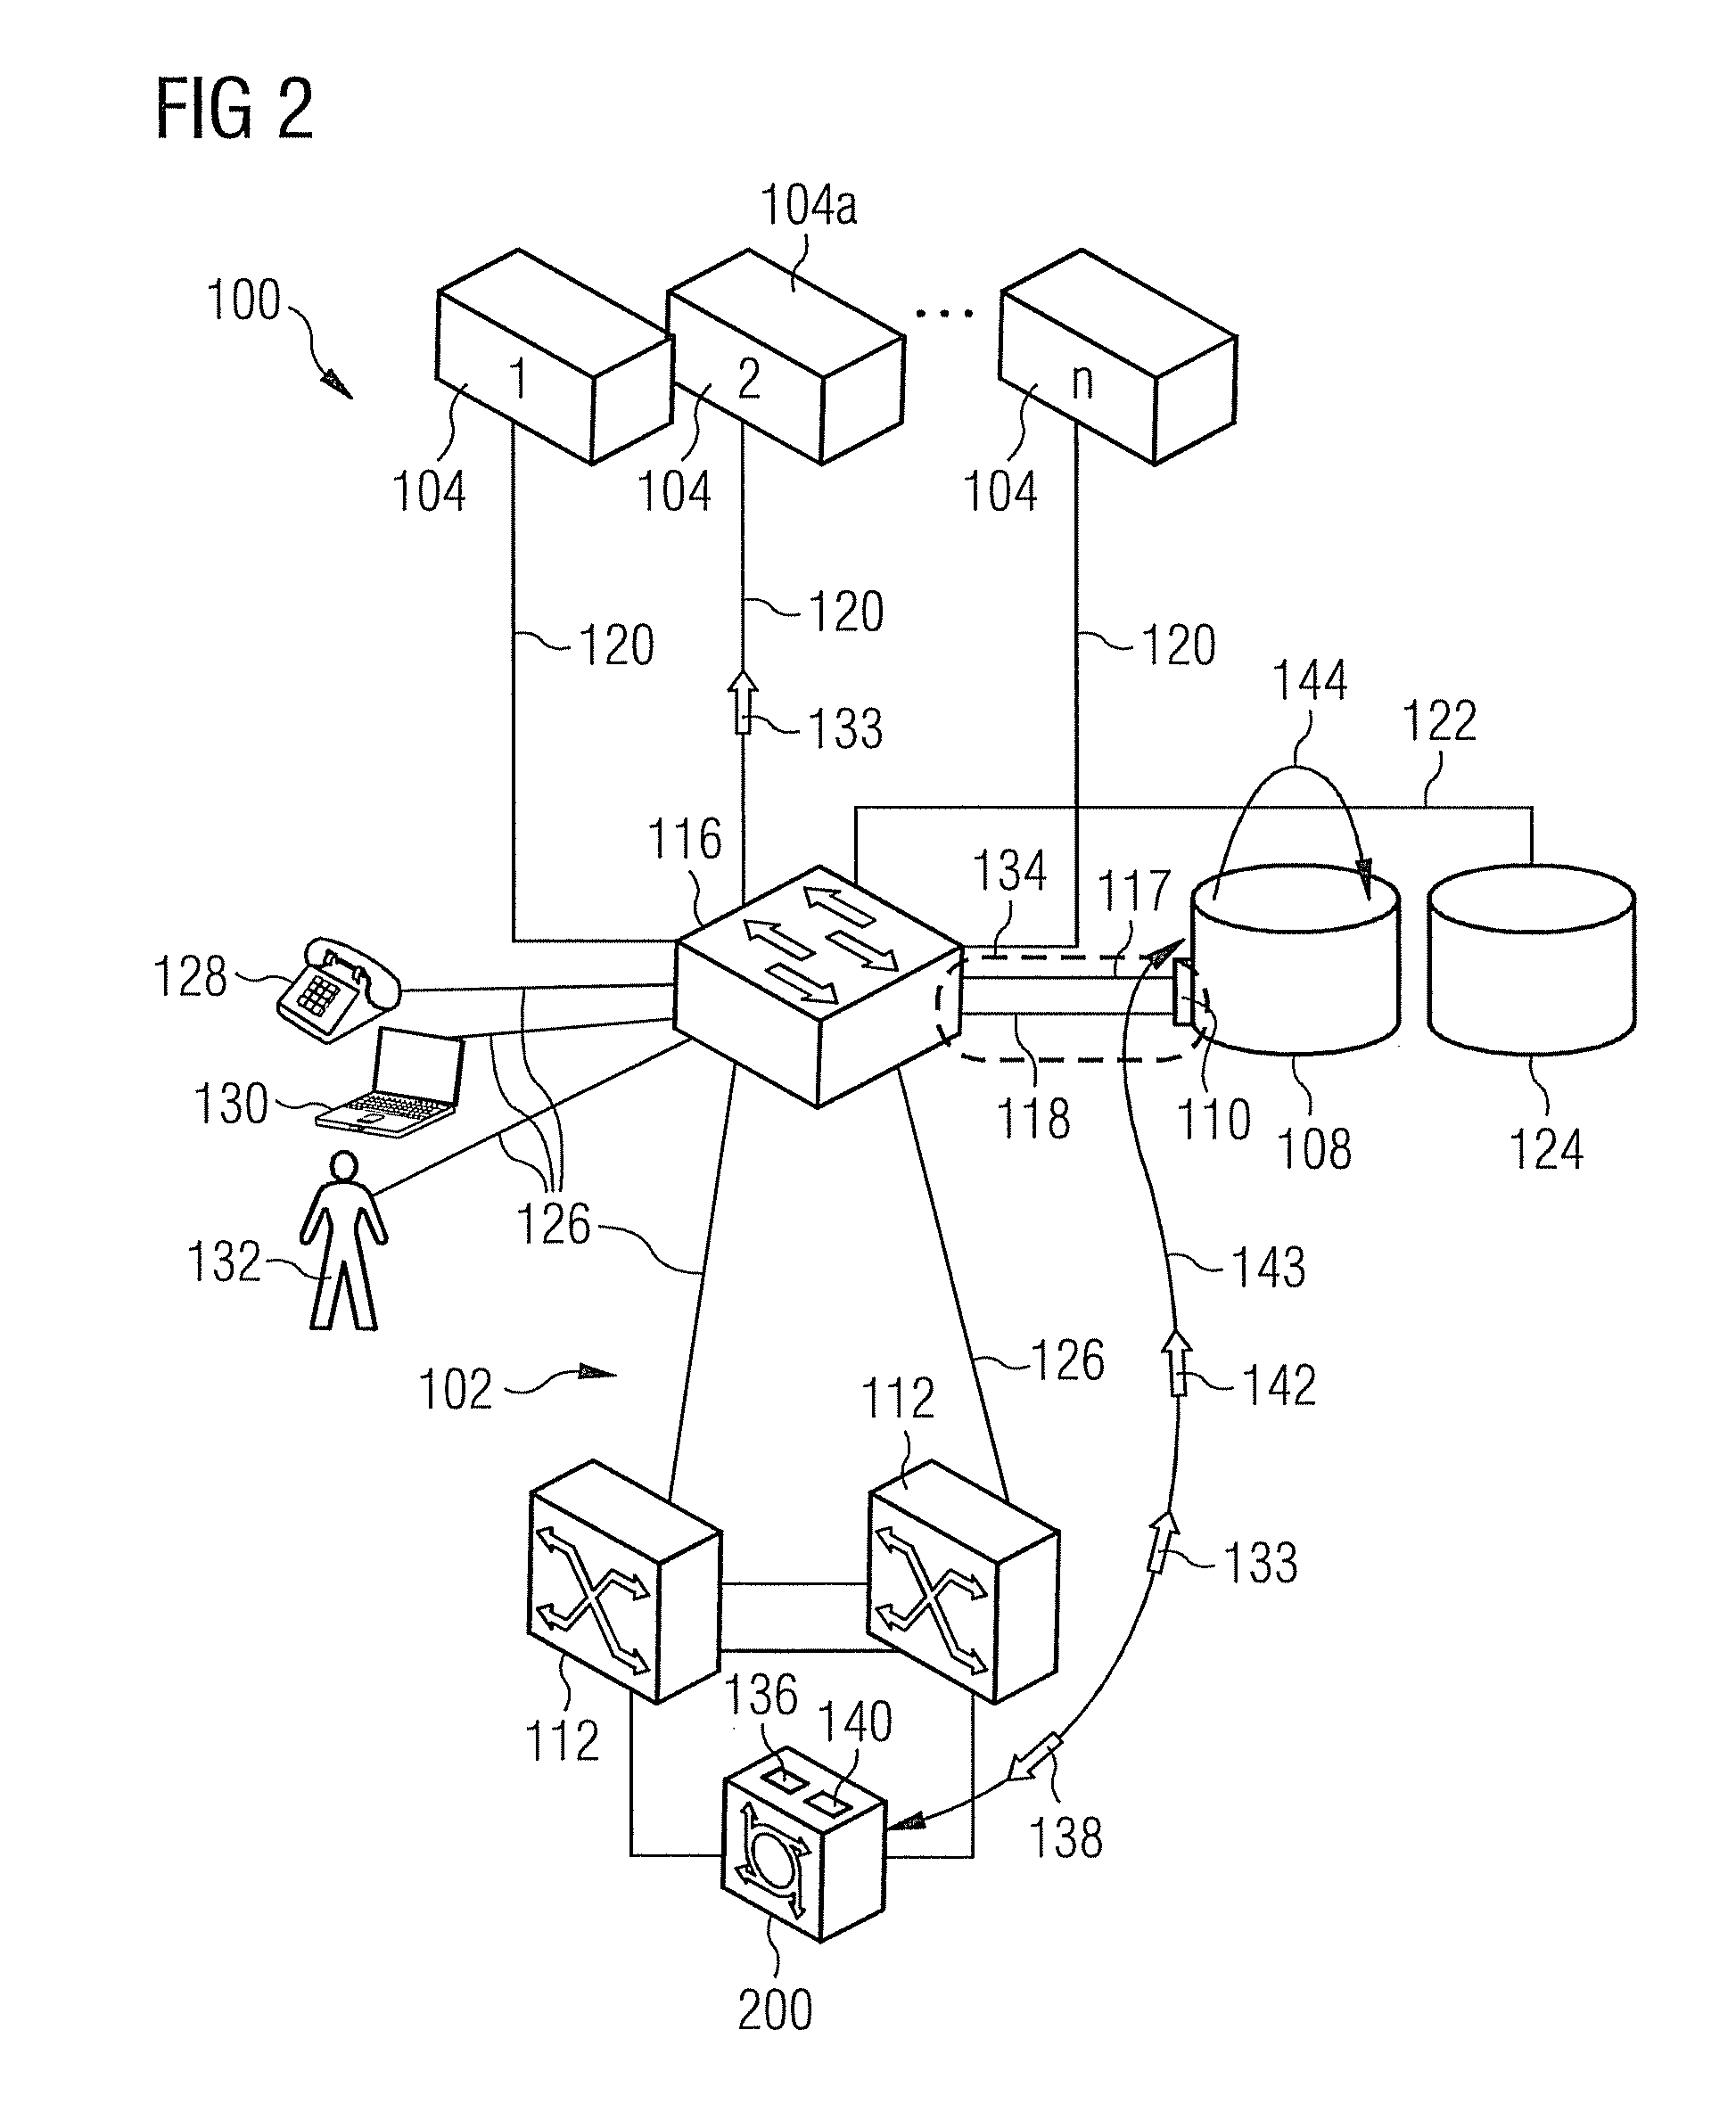 Auto-configuration of network devices